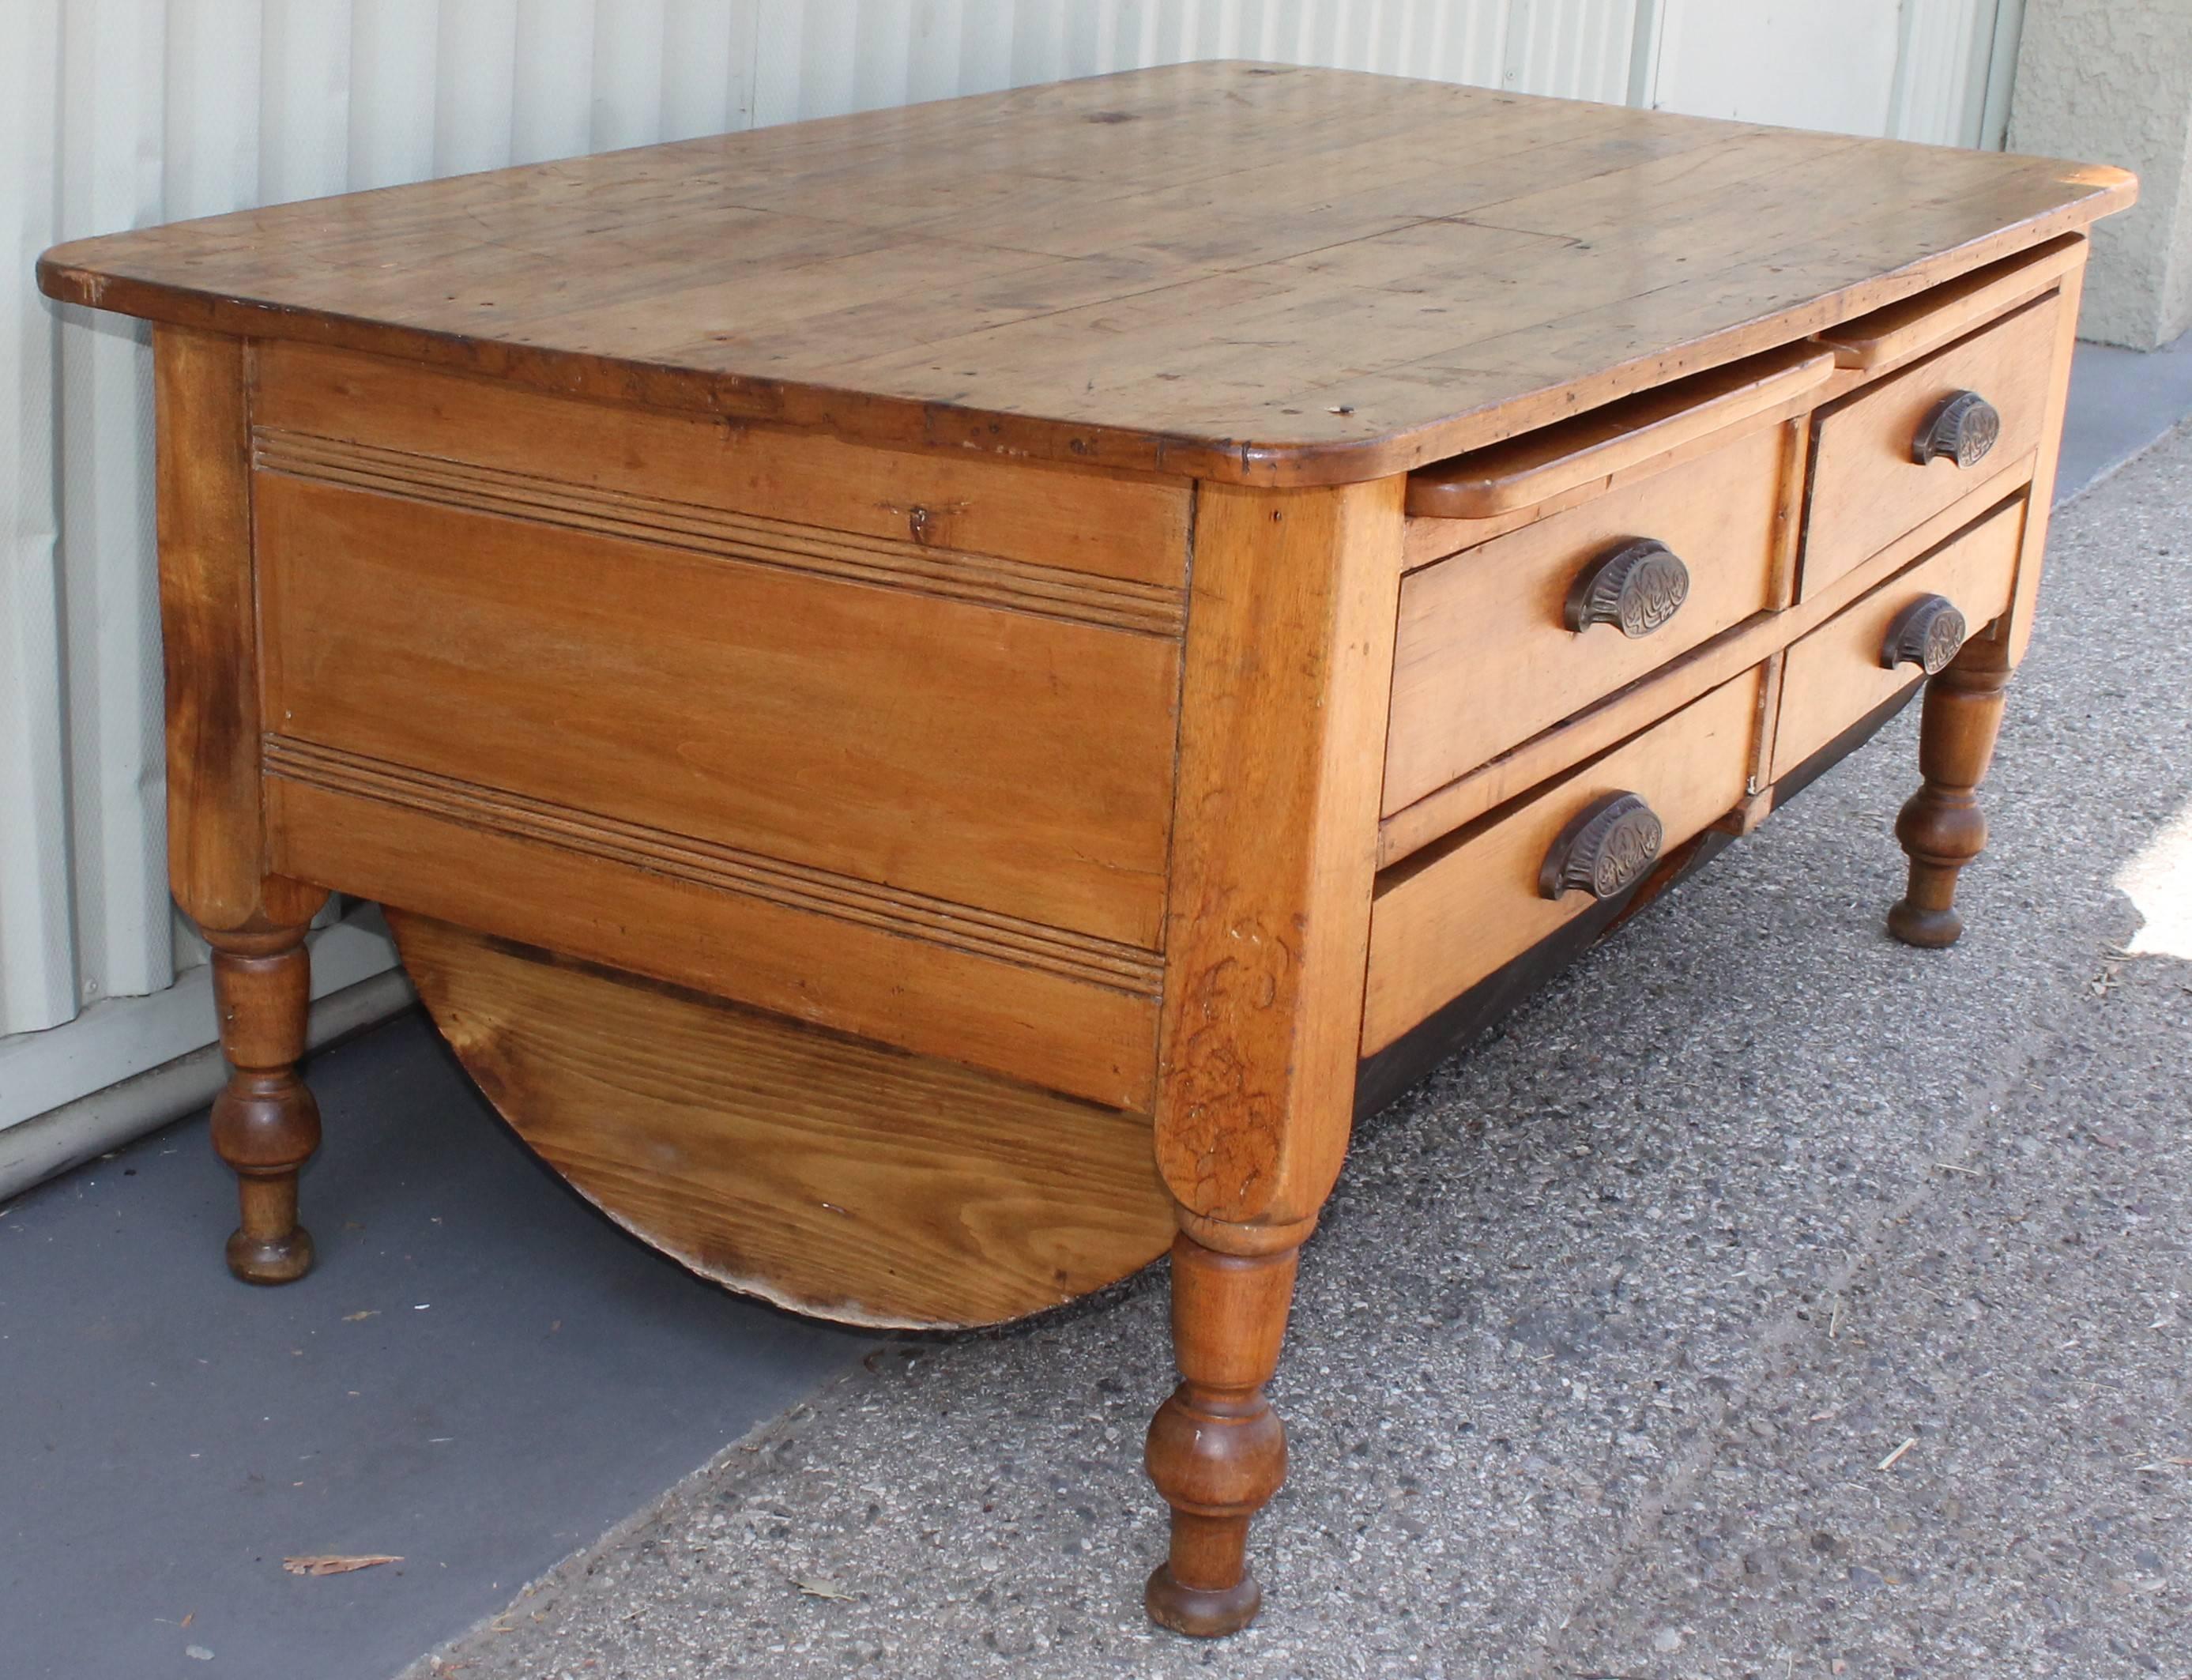 This cool table has four drawers and the two bottom drawers are pull-out bins. On top of the two drawers are slide out writing drawers. This old kitchen work table has the original cast iron drawer pulls or hardware. This coffee table is in pine and